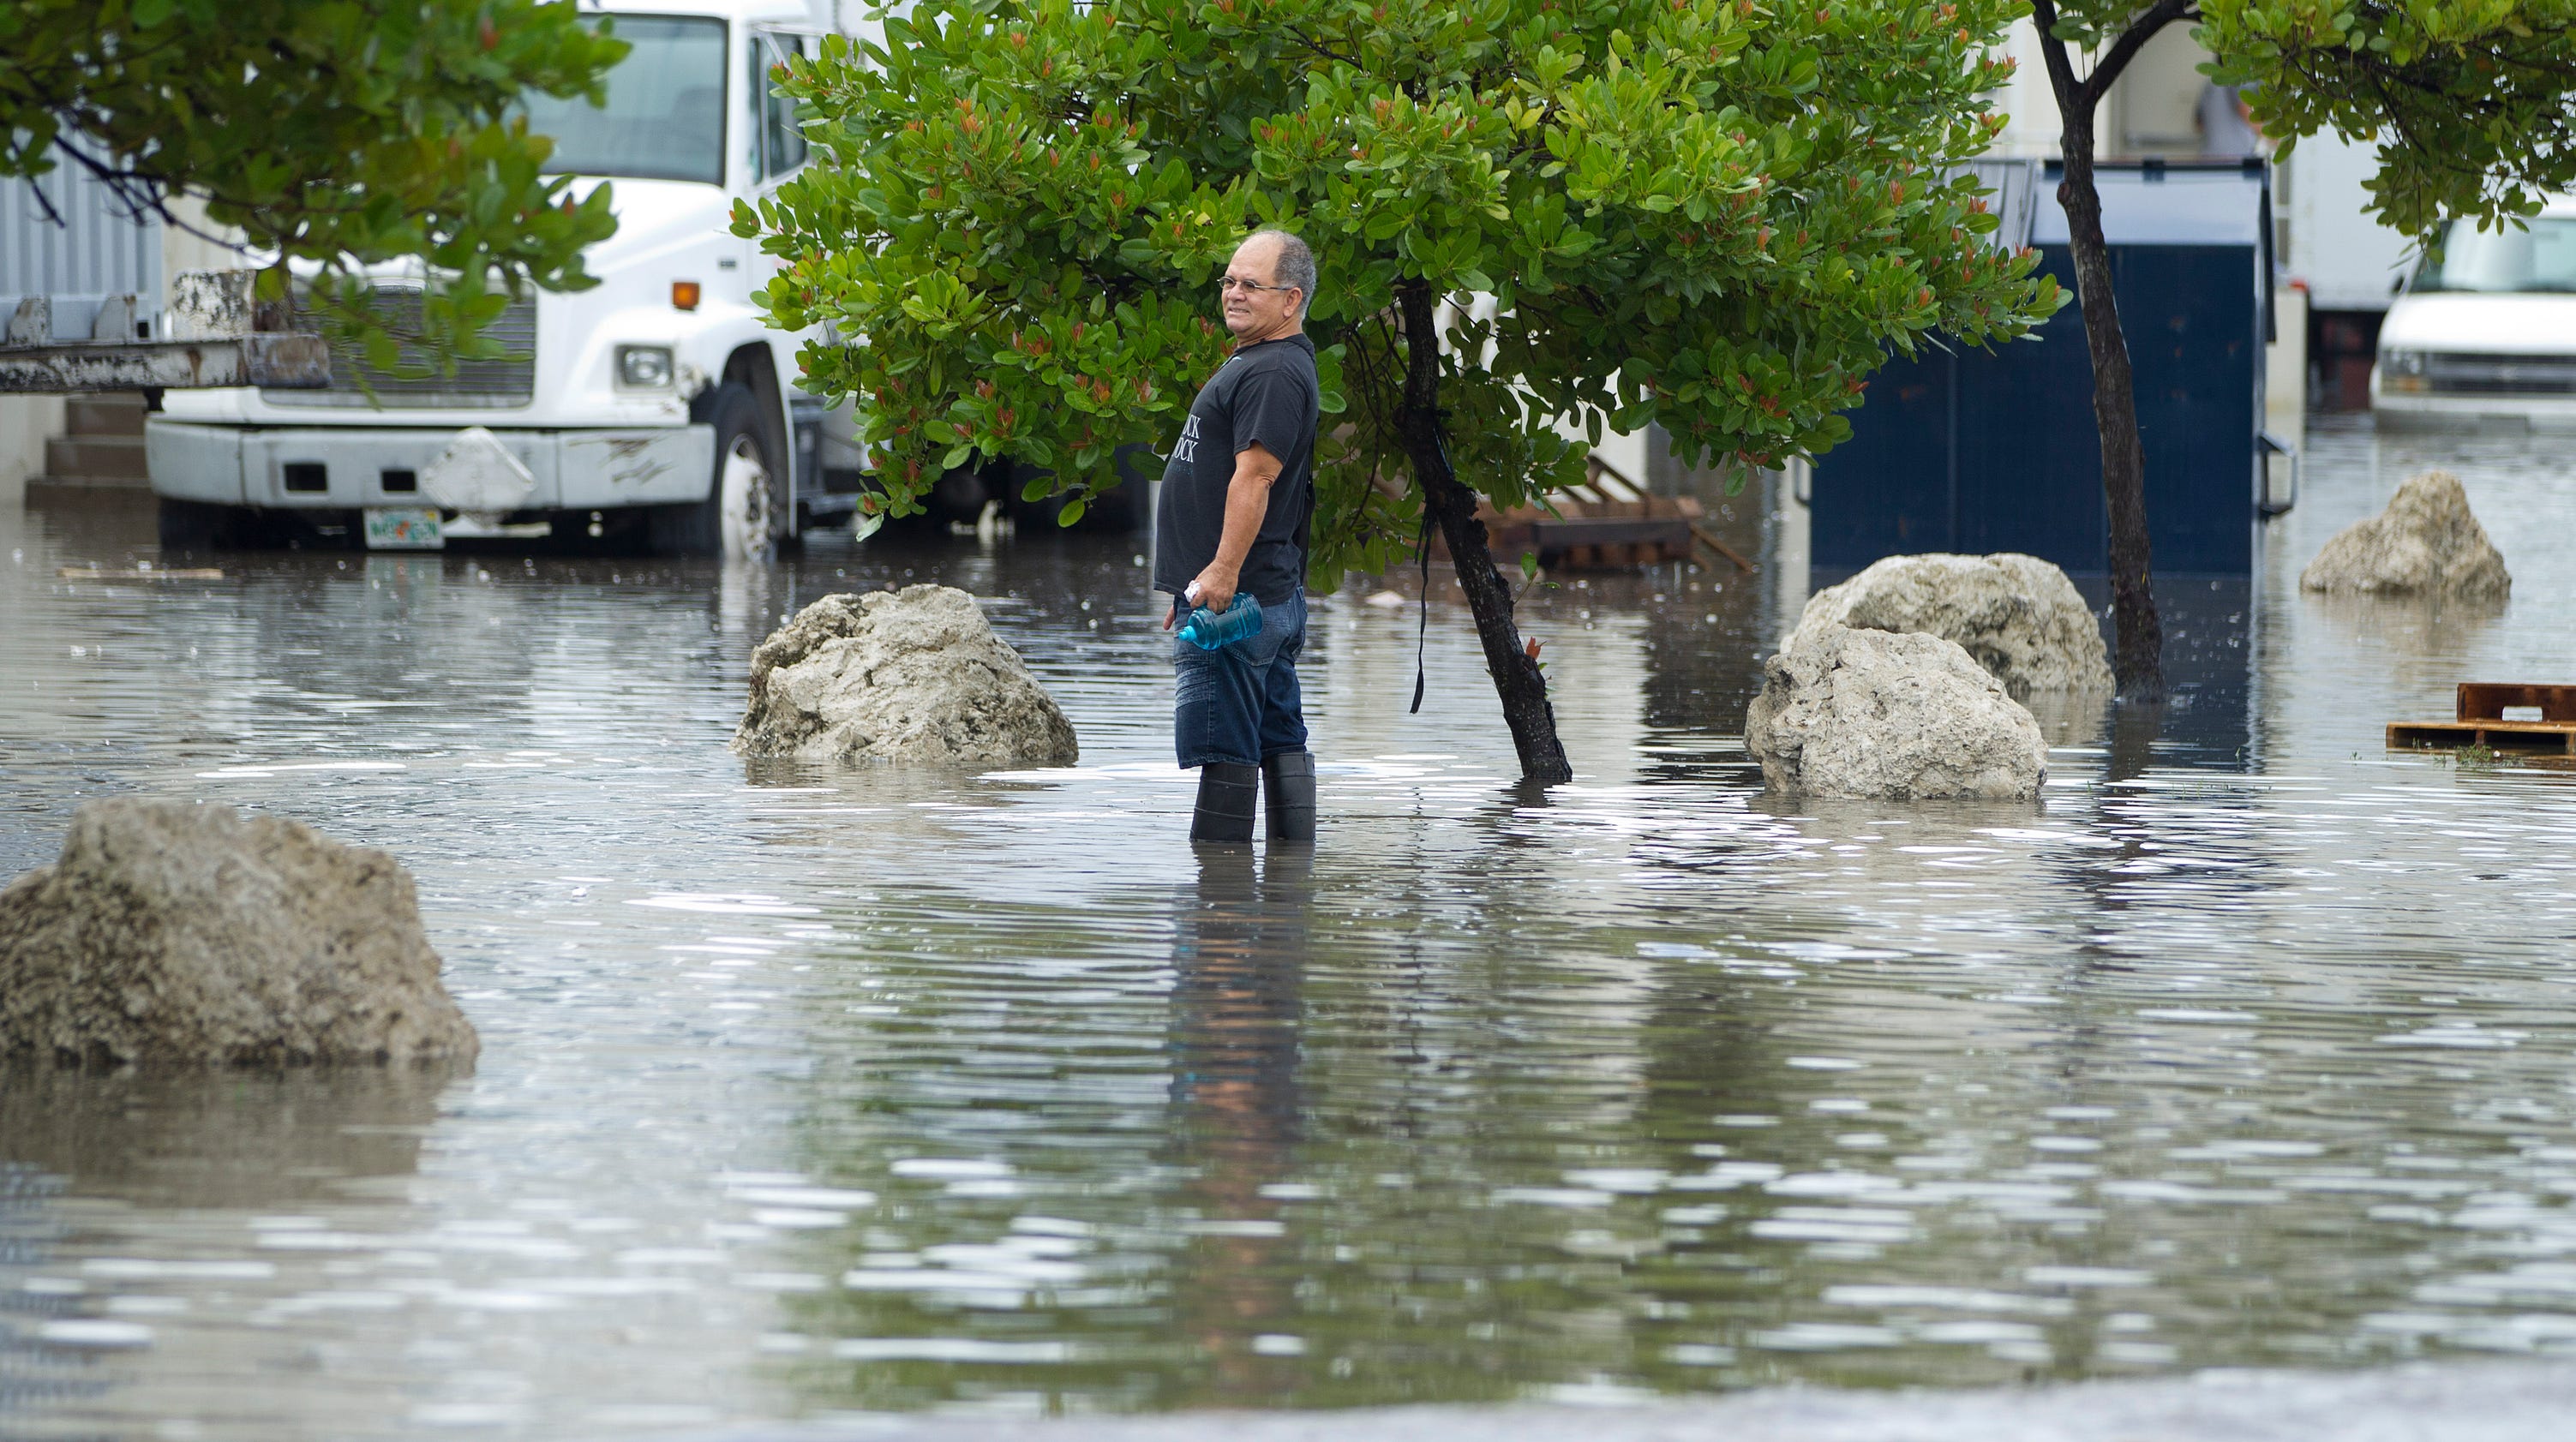 Miami is one of USA's top hot spots for climate change